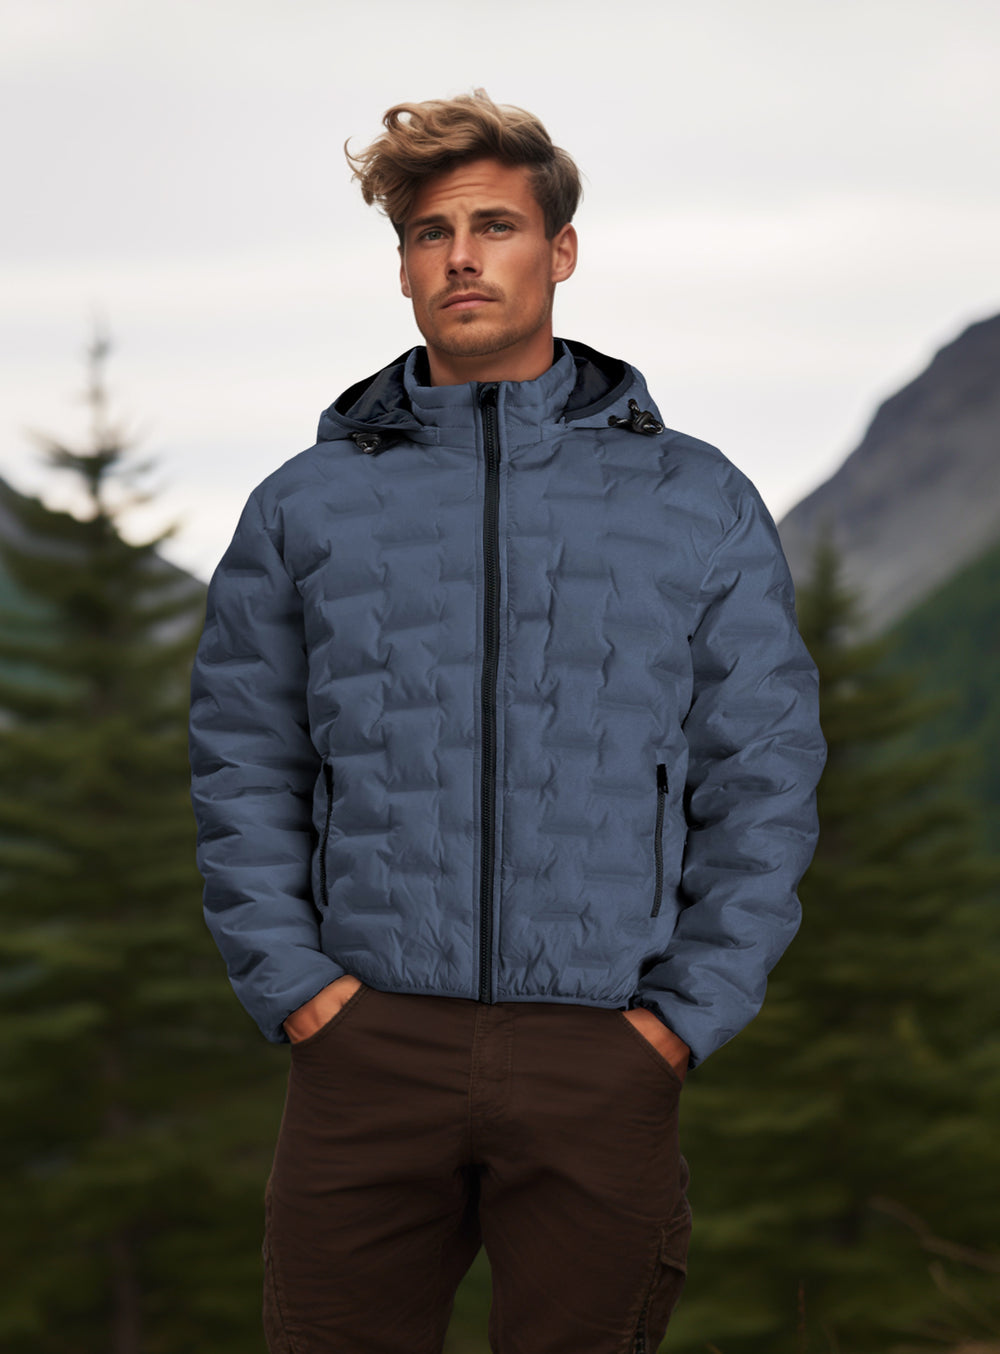 Under Armour Coldgear Reactor Packable Quilted Jacket, $199